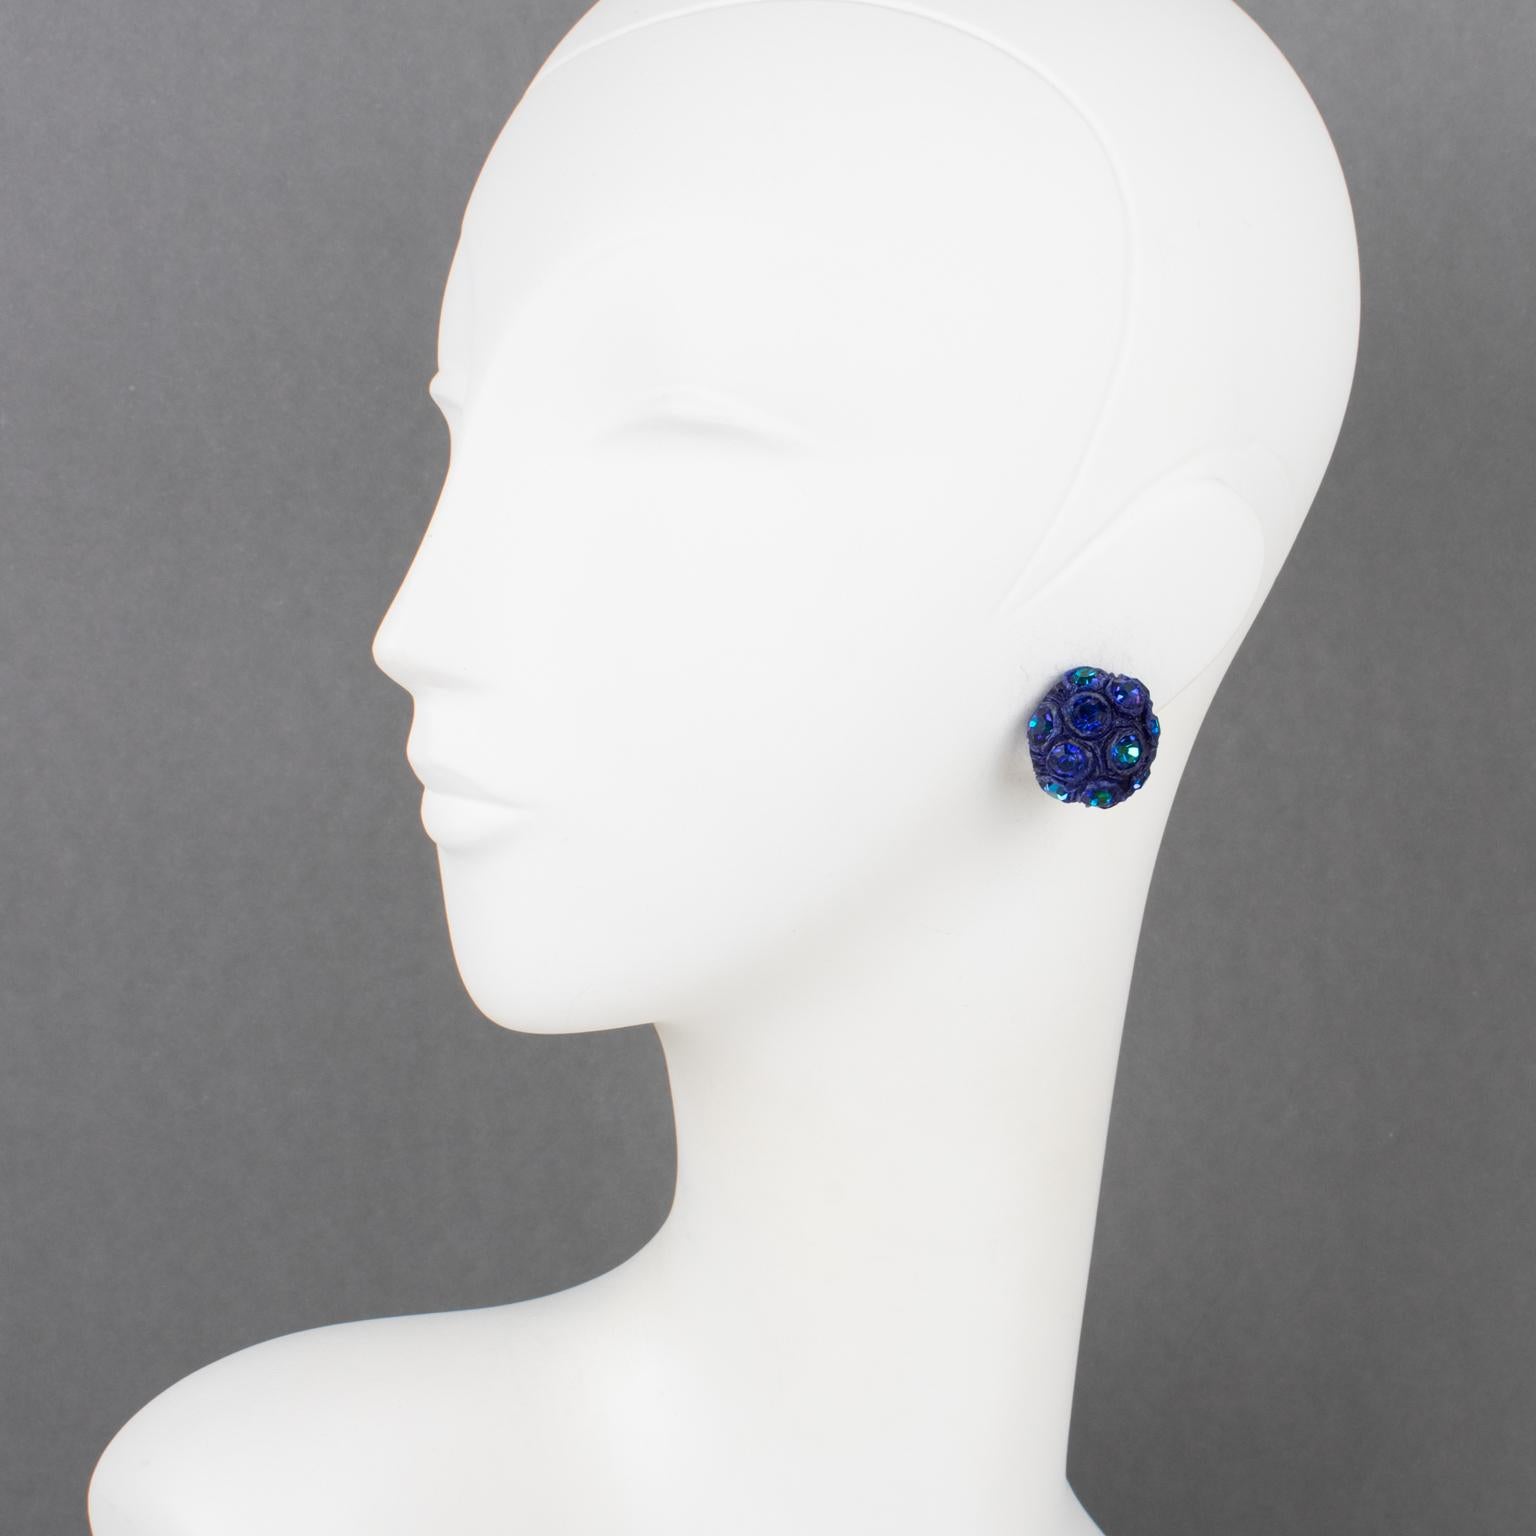 These lovely Monique Vedie resin clip-on earrings feature a delicate rounded domed shape with cobalt blue carved Talosel framing, ornate with faceted crystal rhinestones in AB blue iridescent color. The earrings have the typical French clip-back